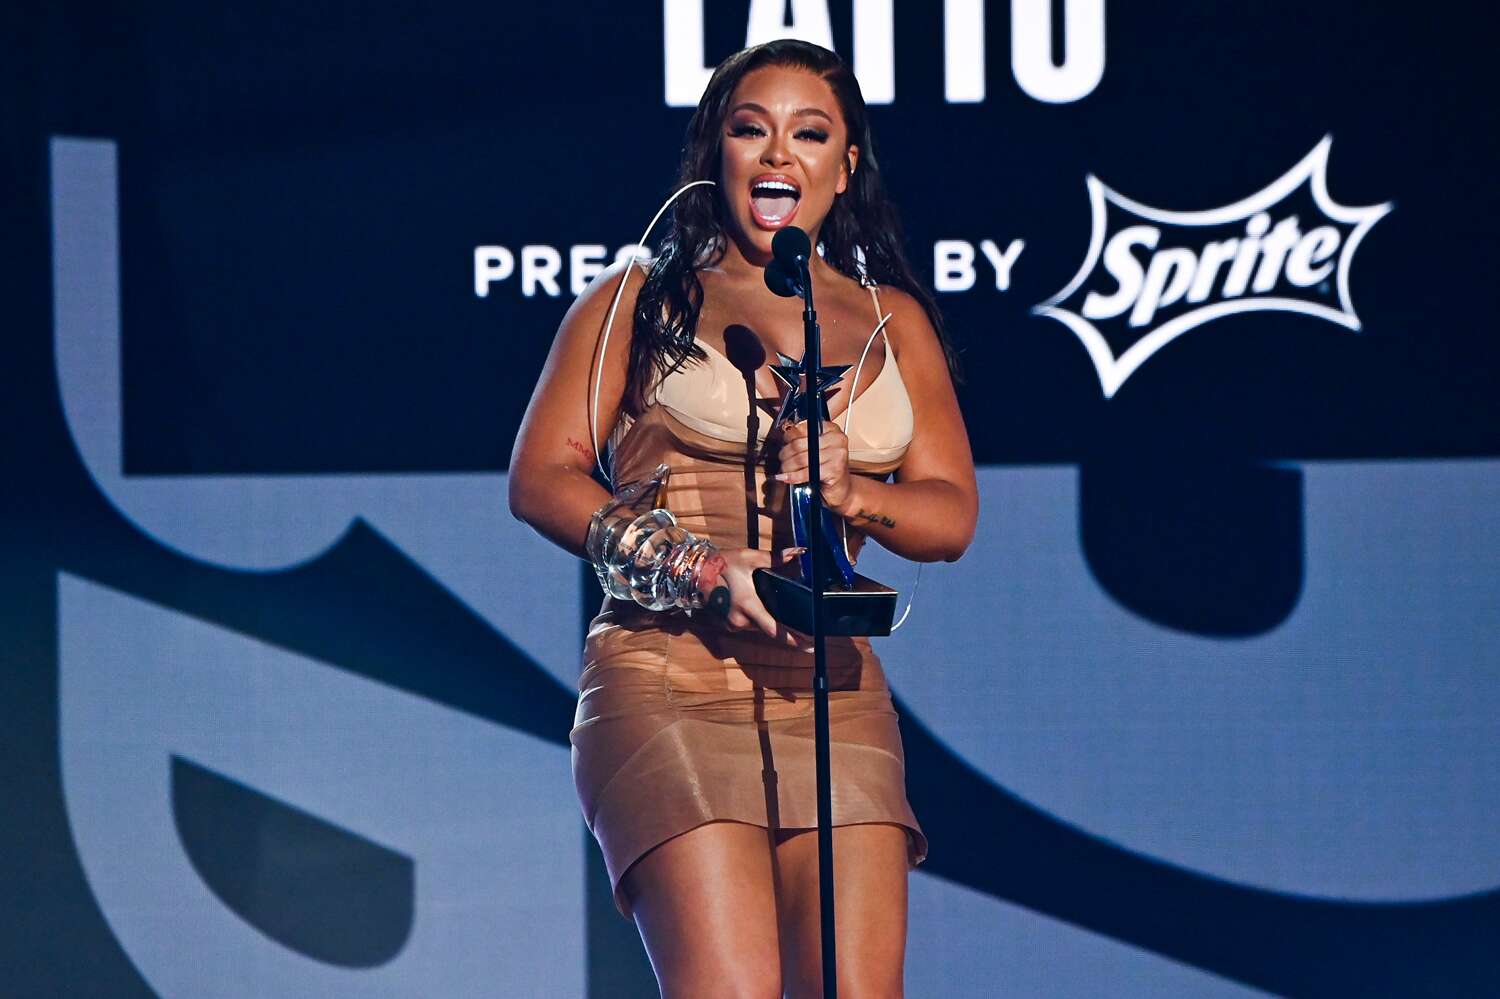 Latto accepts the Best New Artist award presented by Sprite onstage during the 2022 BET Awards at Microsoft Theater on June 26, 2022 in Los Angeles, California.